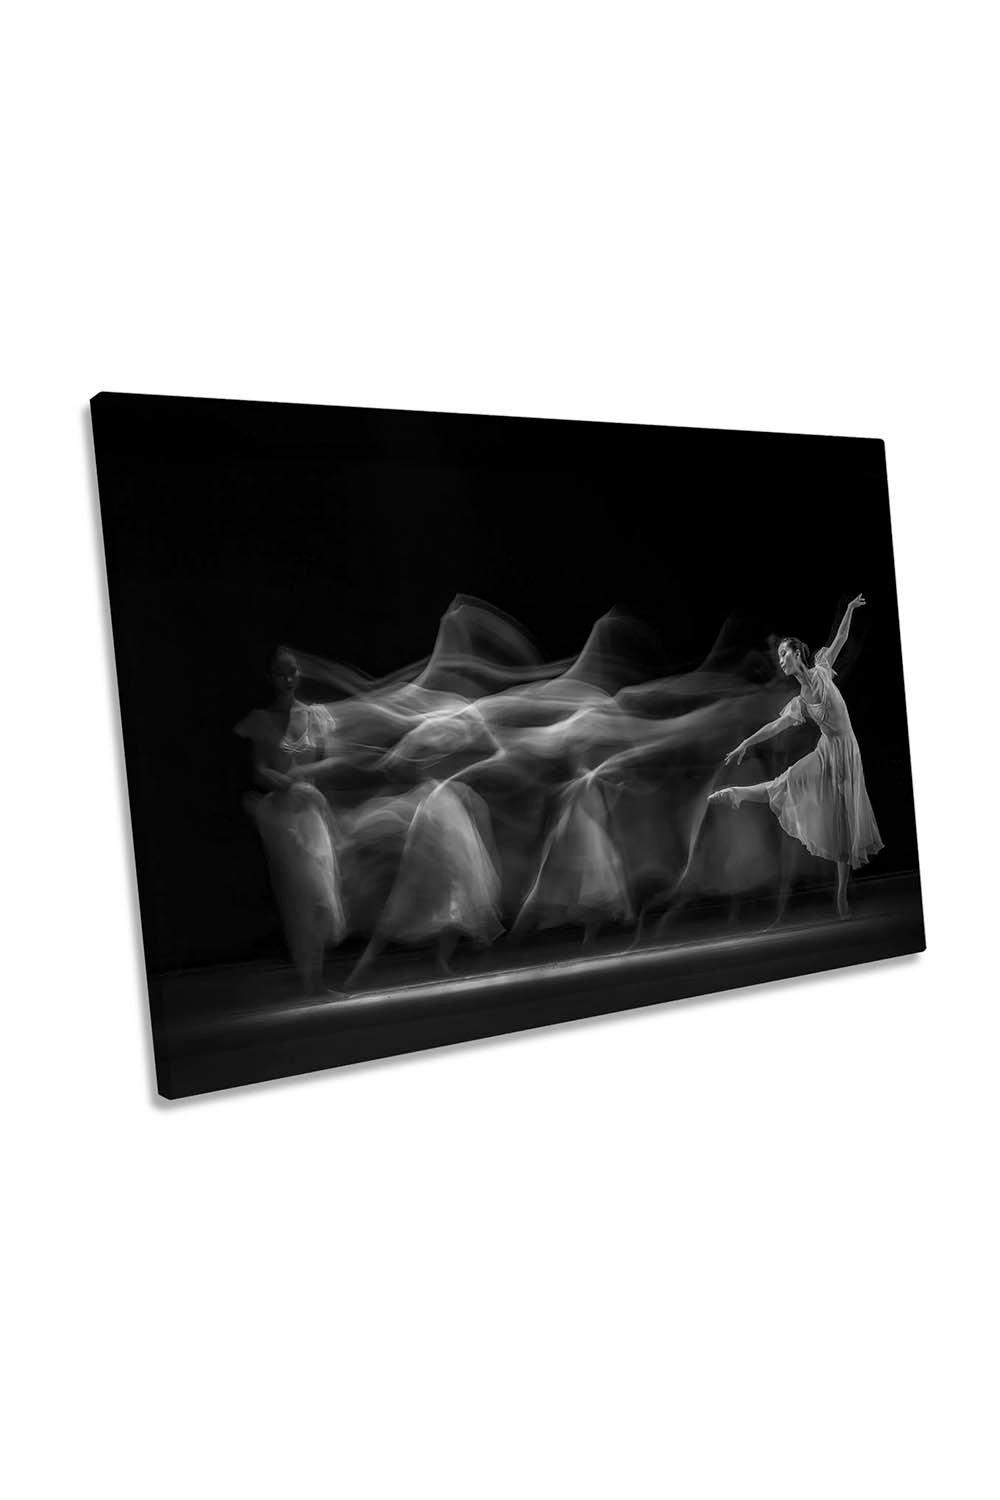 Waves of Ballerina Dancer Canvas Wall Art Picture Print